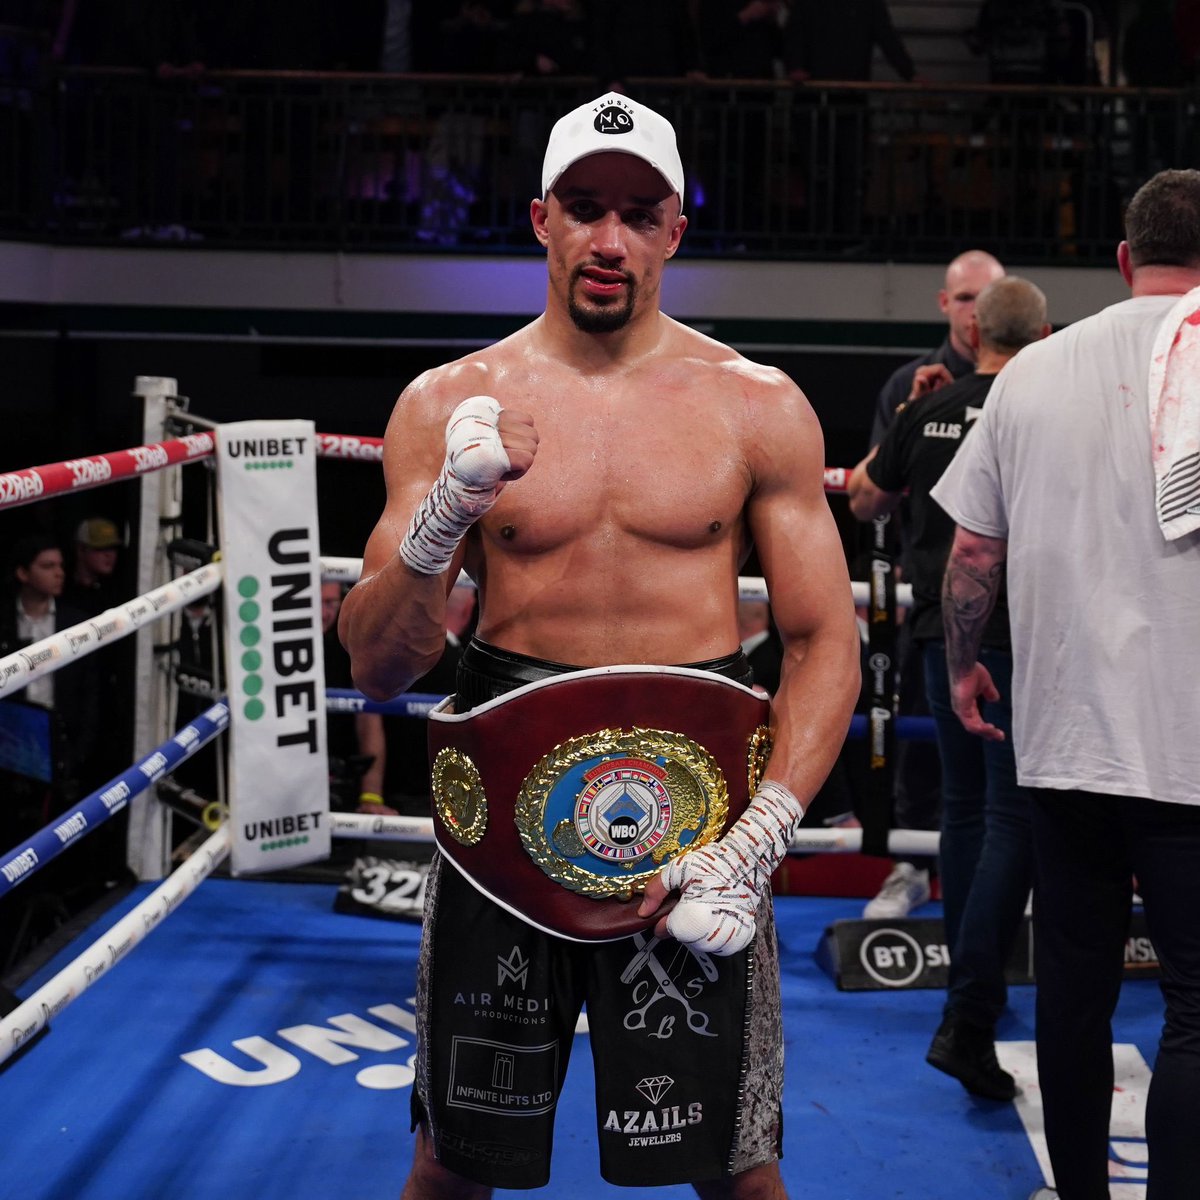 An enthralling night of boxing proved that we are well stocked with future champions for many years to come!

Read my thoughts on last Friday night here: bit.ly/agyt141